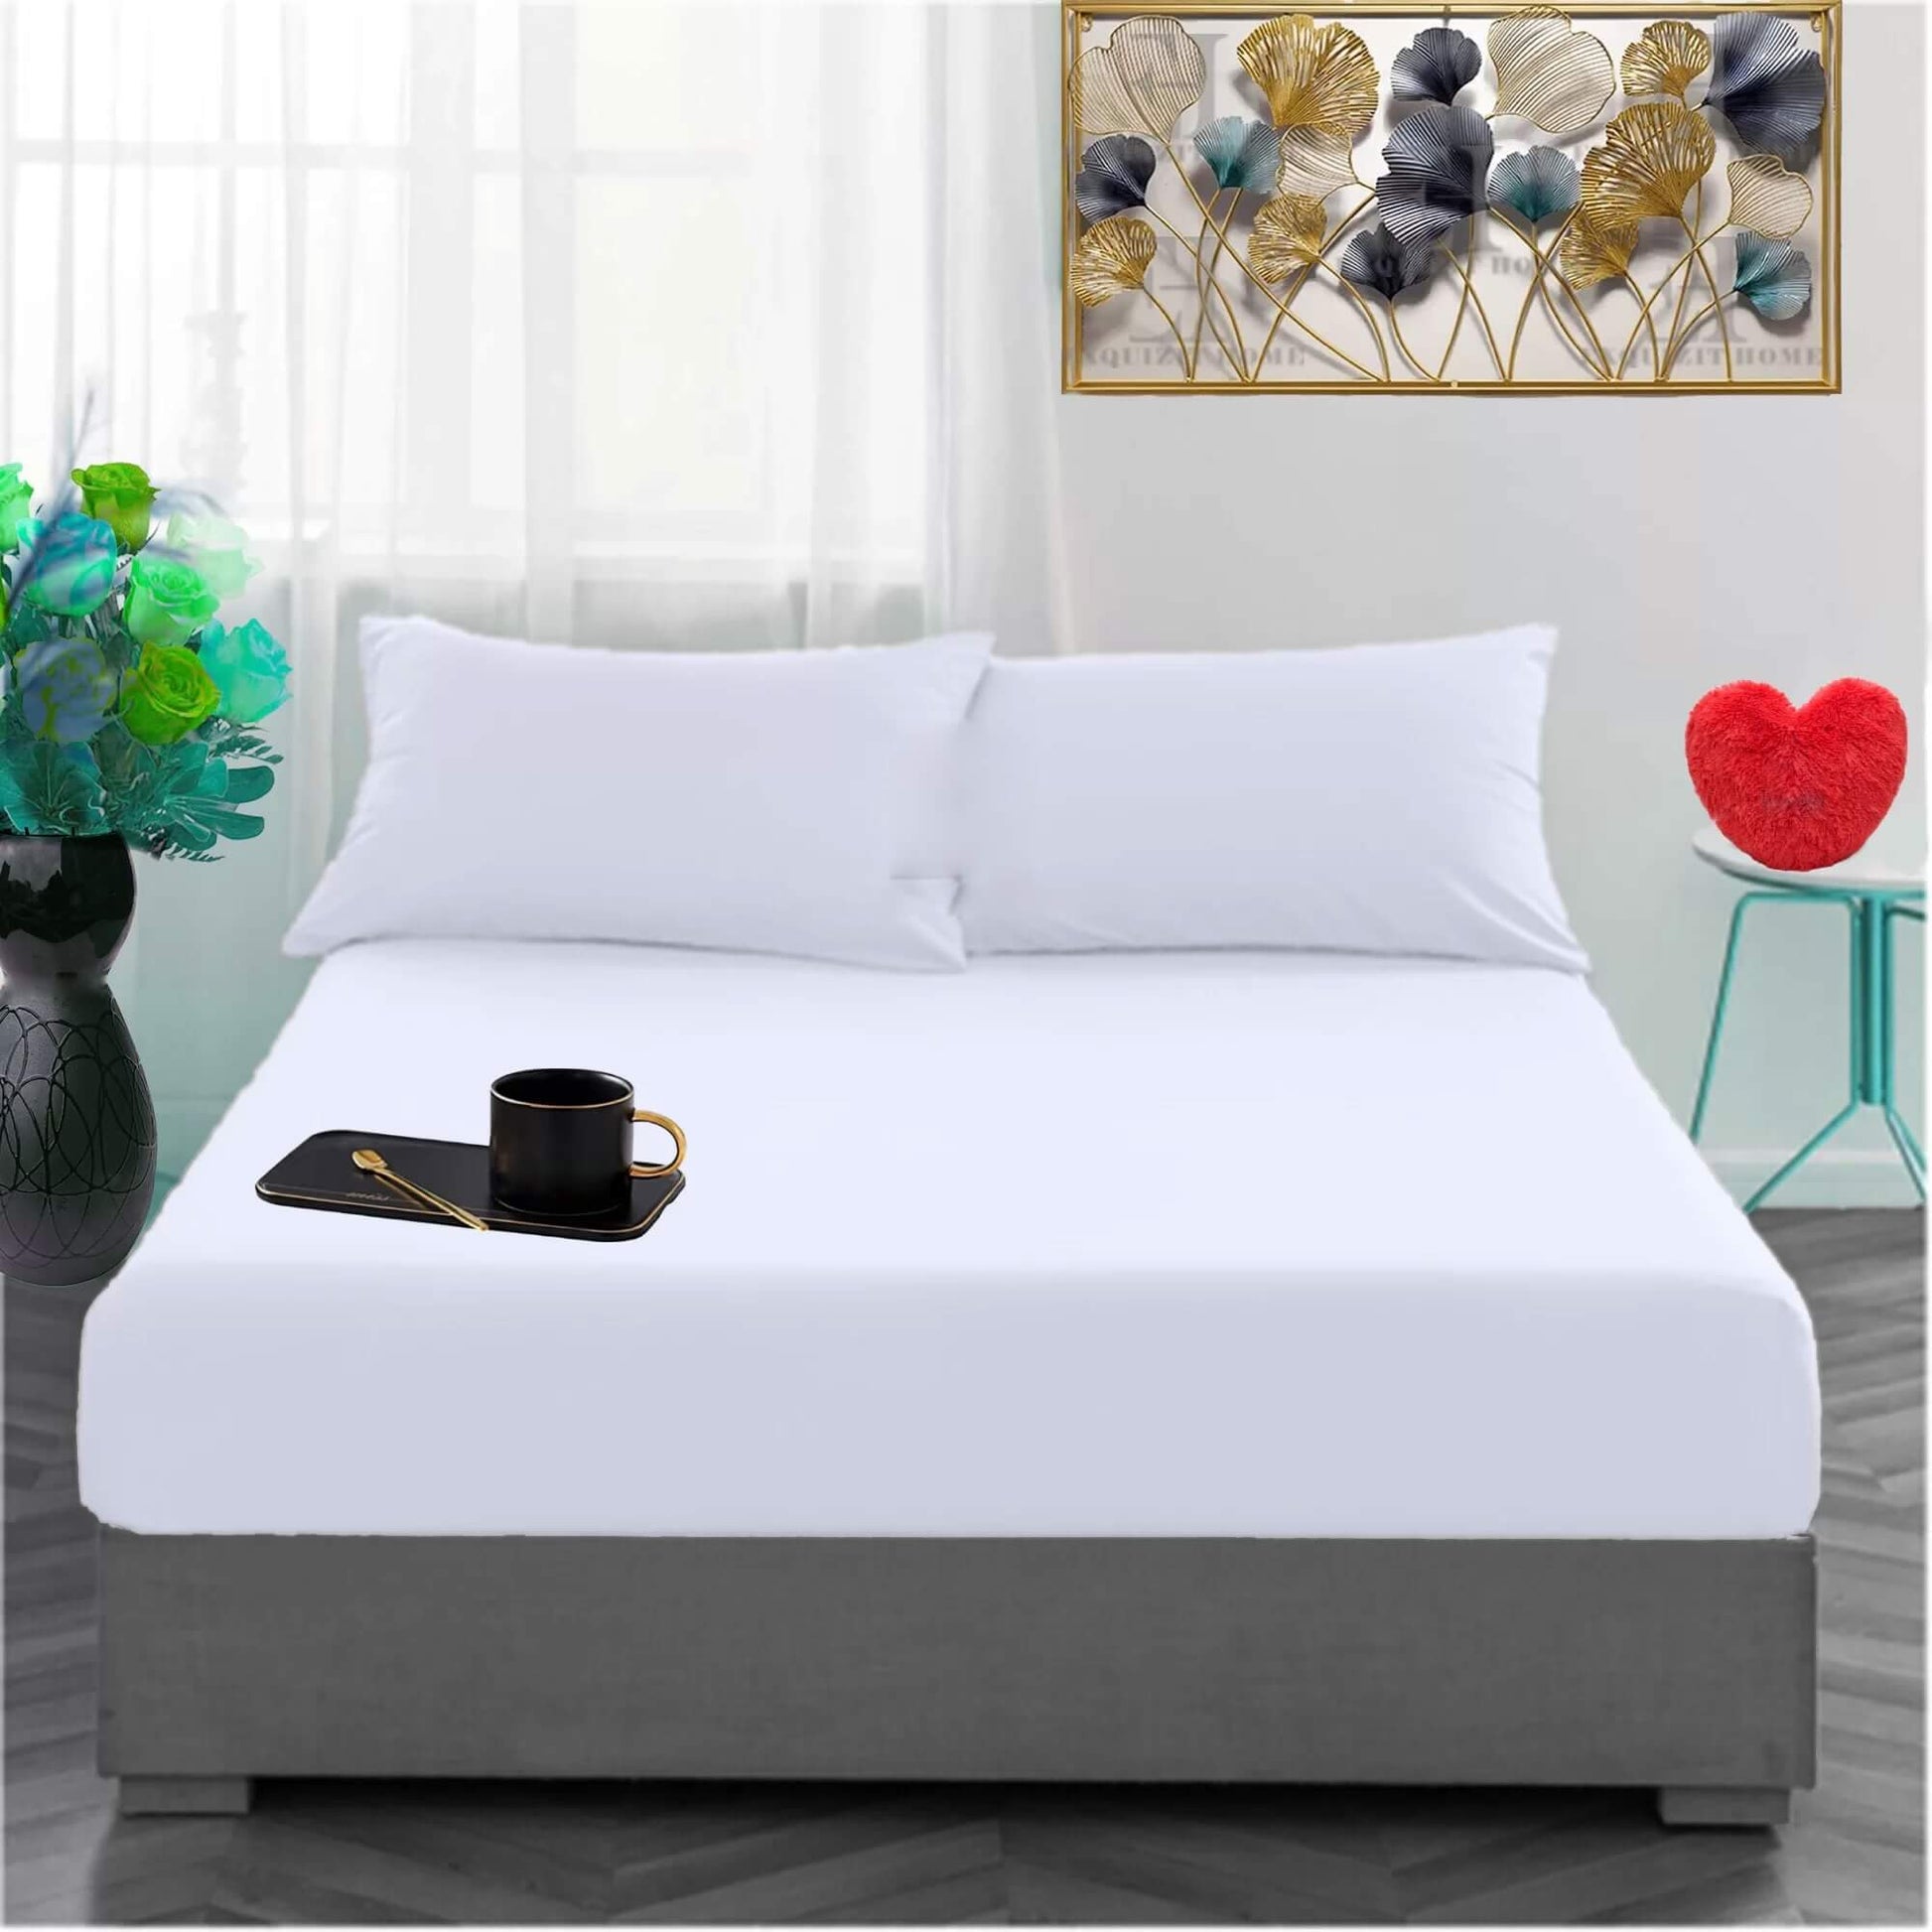 Small Double Fitted Sheet 100% Brushed Cotton Bed Sheet - TheComfortshop.co.ukBed Sheets0721718977254thecomfortshopTheComfortshop.co.ukFlannelette FIT White 4FT-1White4FT Small DoubleSmall Double Fitted Sheet 100% Brushed Cotton Bed Sheet - TheComfortshop.co.uk